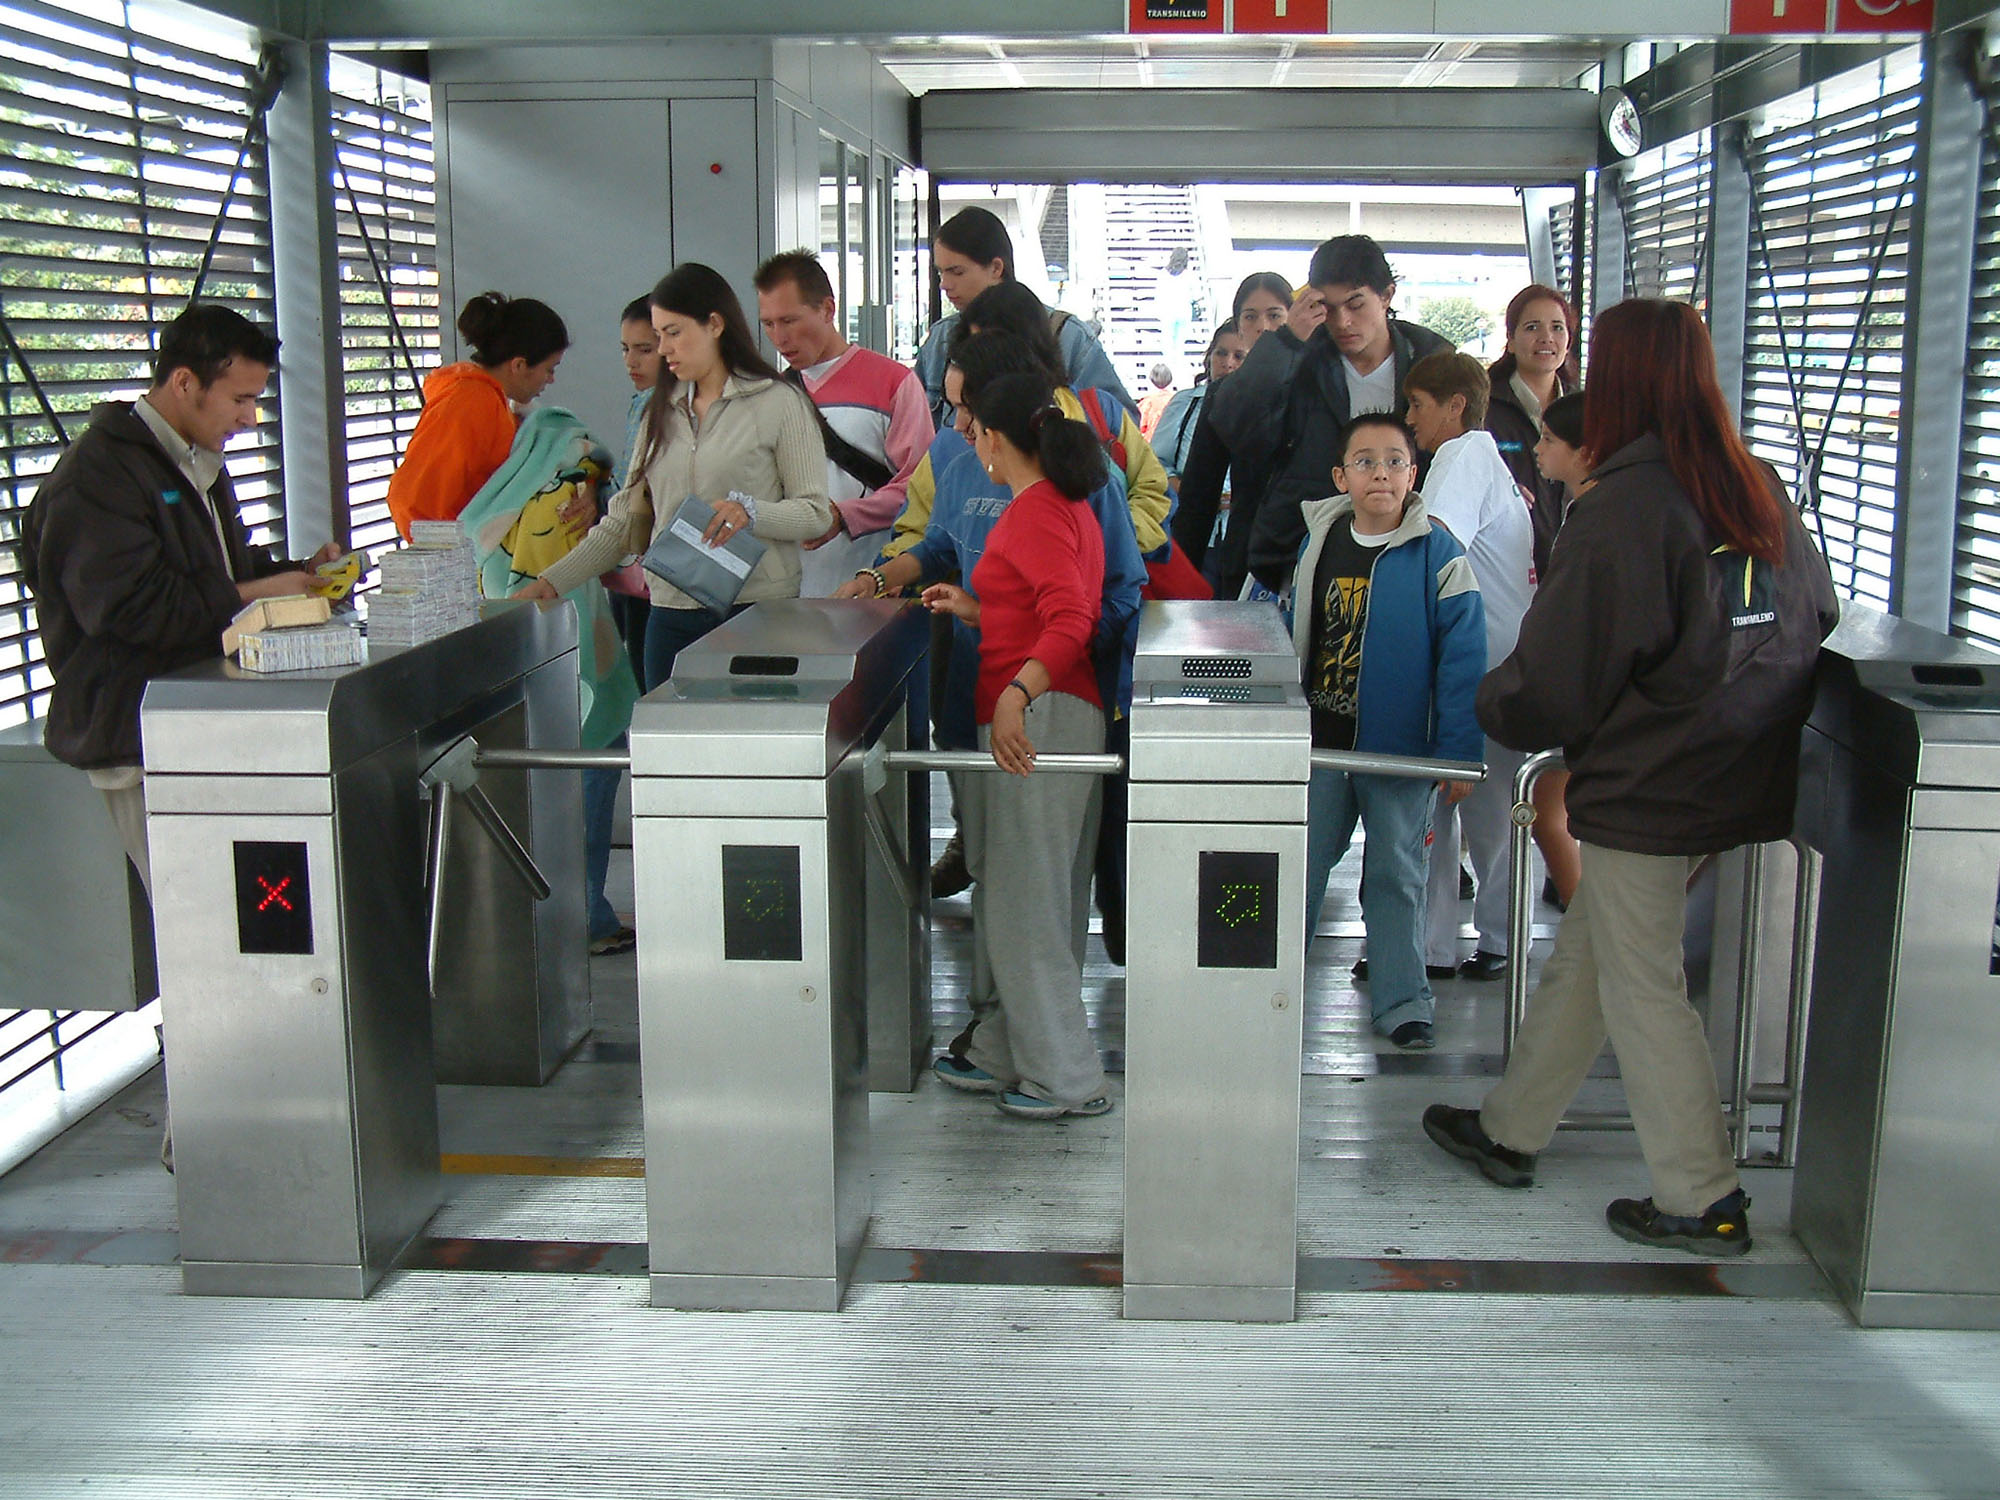 Fig. 18.8 In Bogotá, the contract for purchasing and operating the fare collection equipment was awarded to a single private firm.